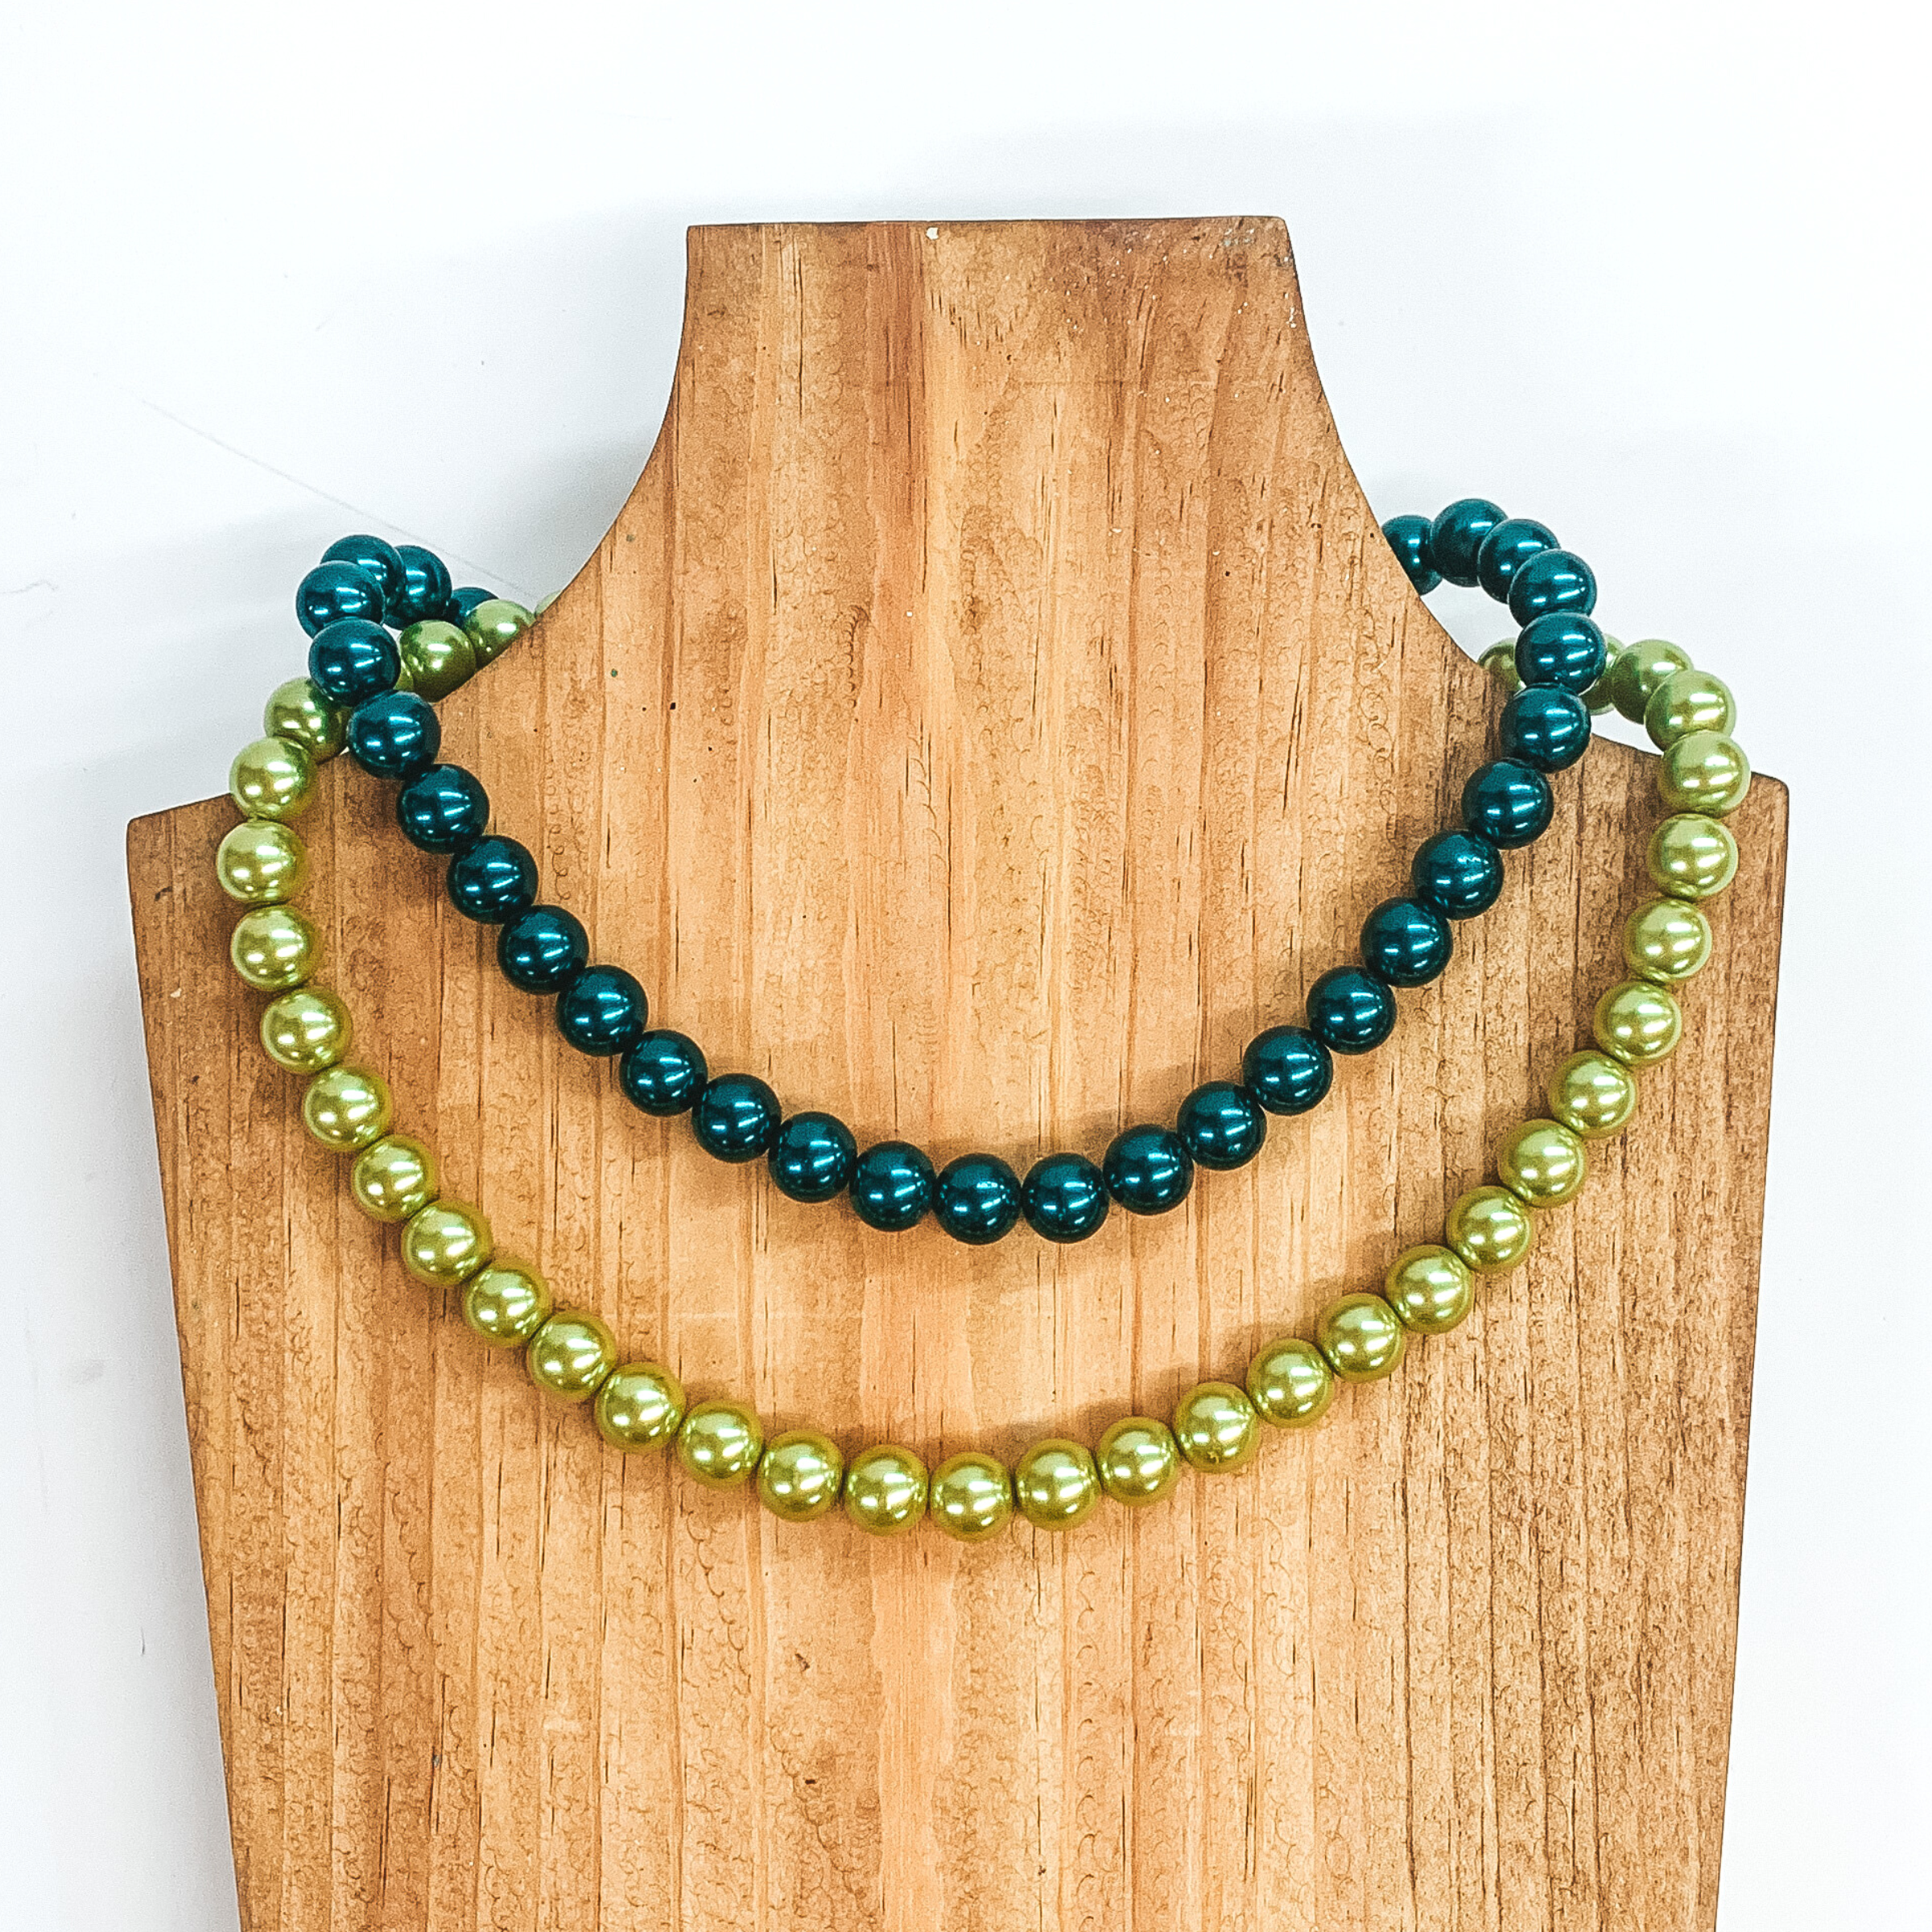 GUG Handmade Pearl Beaded Necklaces in Green and Teal - Giddy Up Glamour Boutique